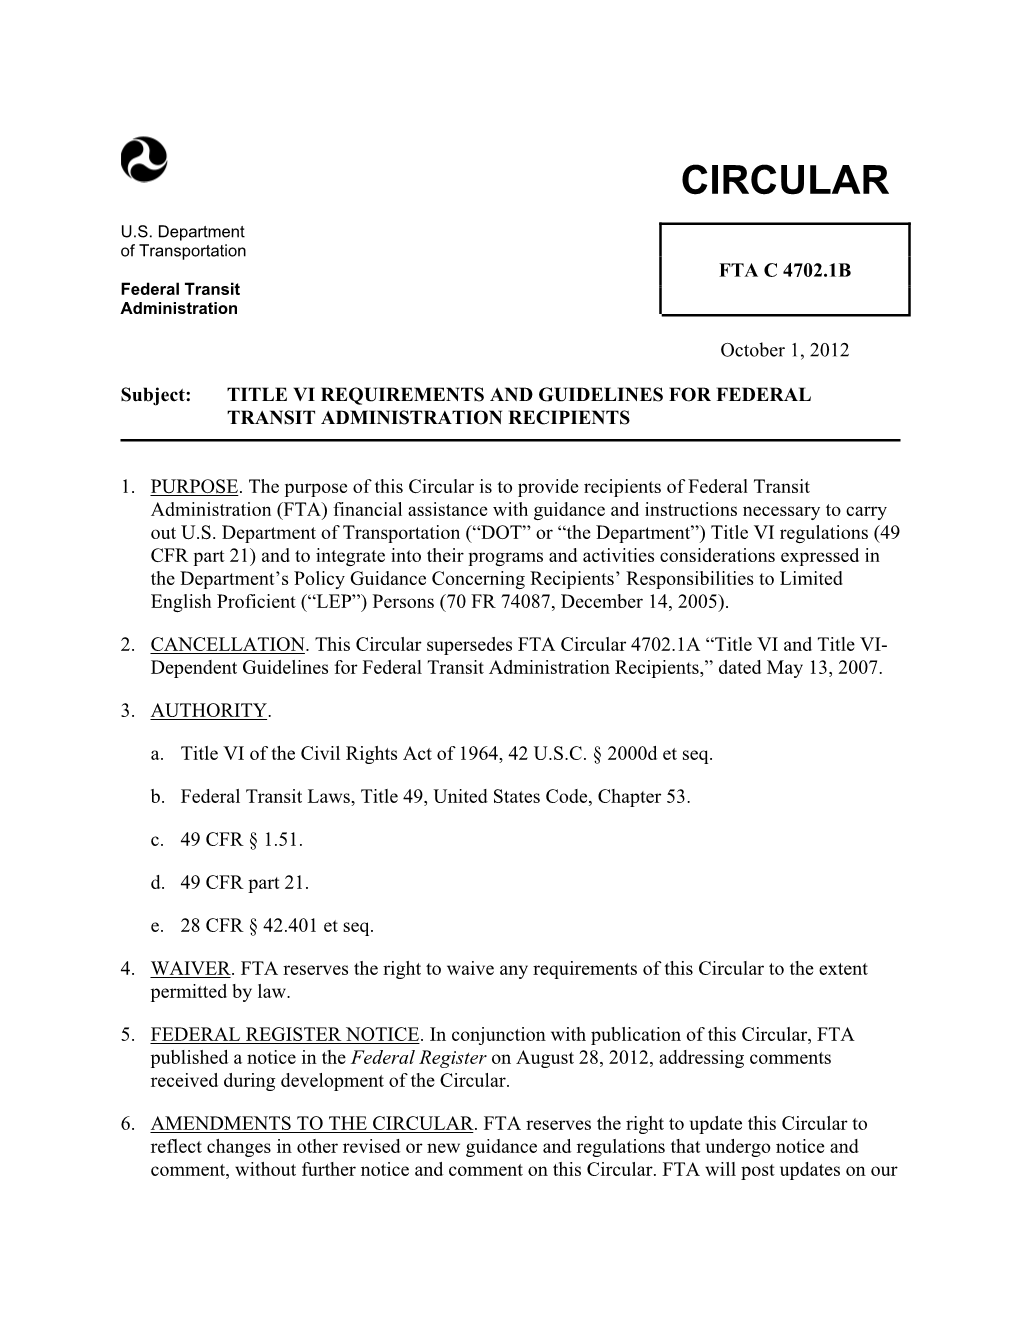 Circular FTA C 4702.1B: Title VI Requirements and Guidelines